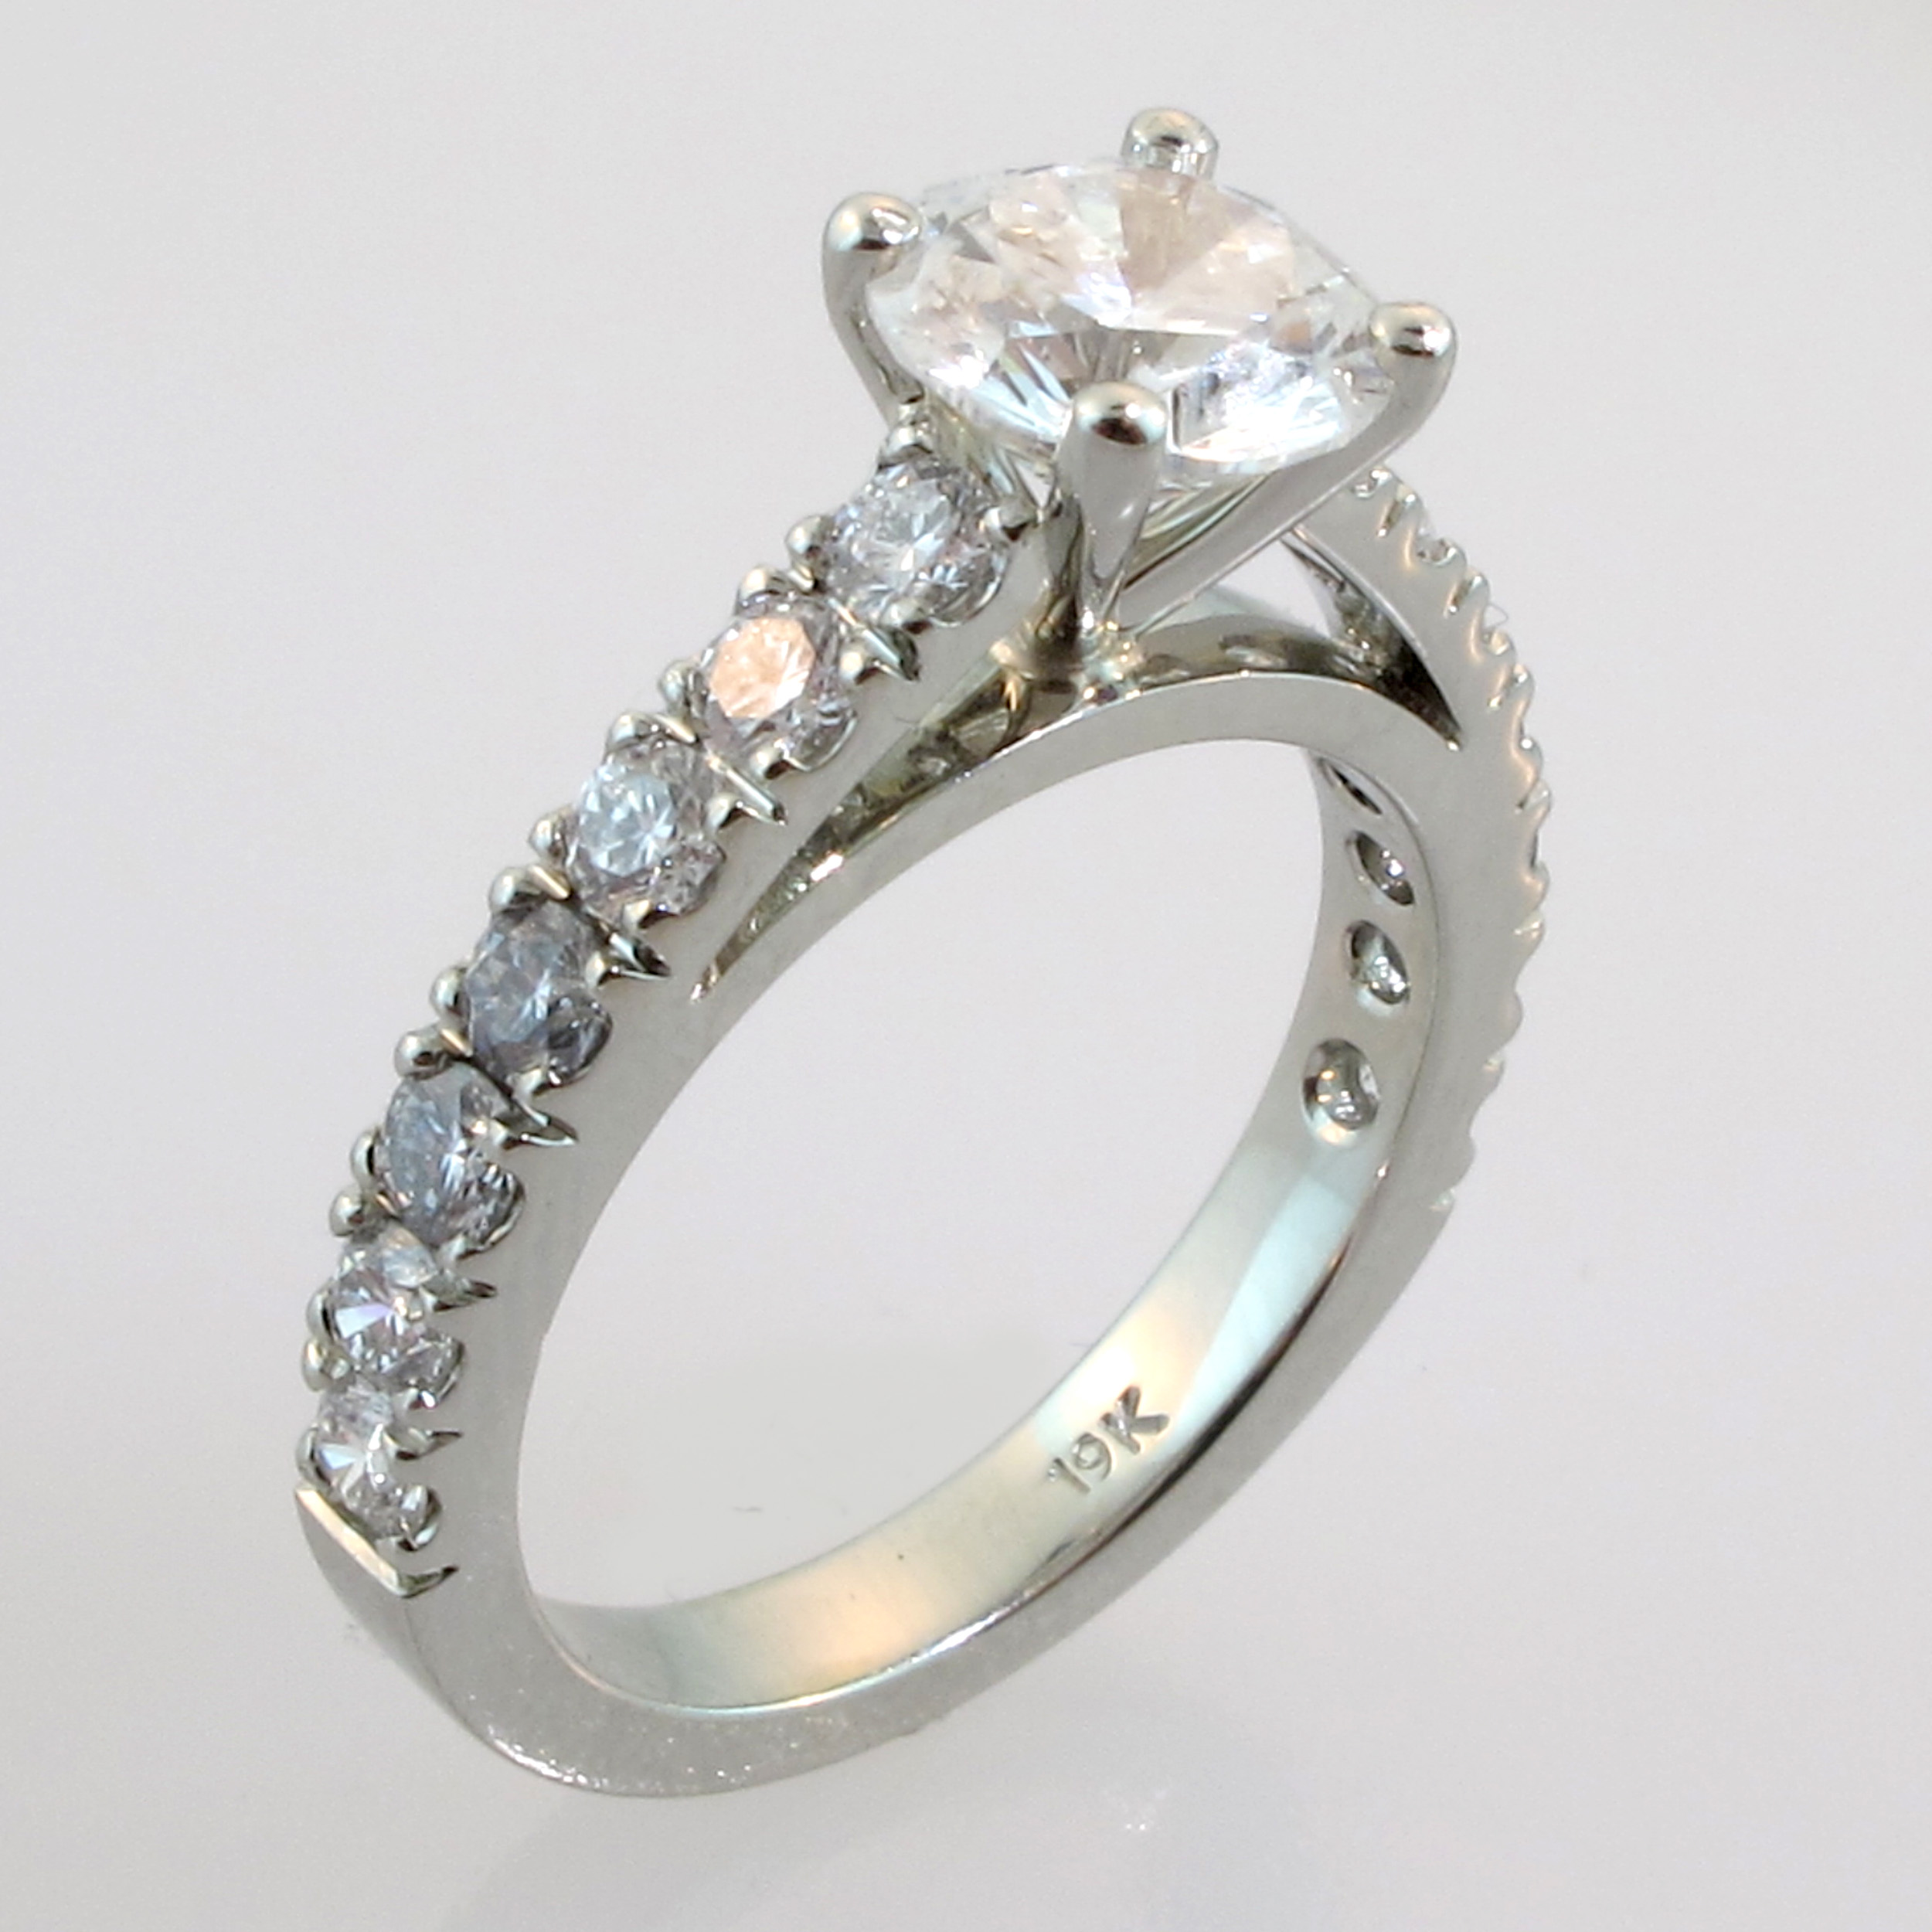 Diamond Engagement Ring Brilliant cut centre stone with side stones